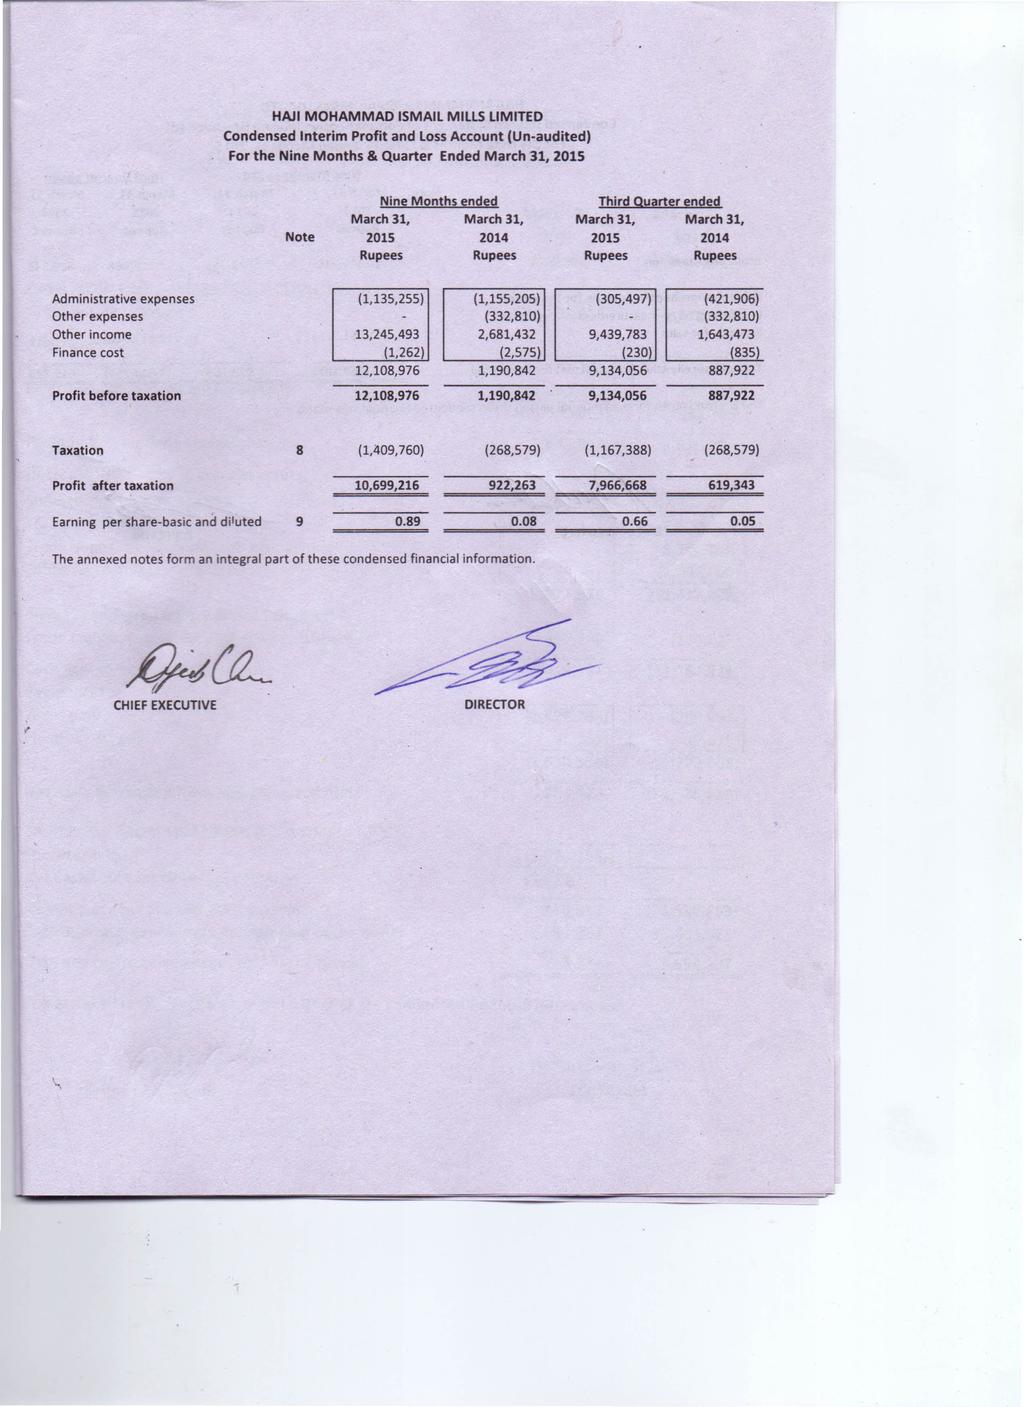 HAJI MOHAMMAD ISMAIL MILLS LIMITED Condensed Interim Profit and Loss Account (Un-audited) For the Nine Months & Quarter Ended March 31, 2015 Note Nine Months ended March 31, March 31, 2015 2014 Third